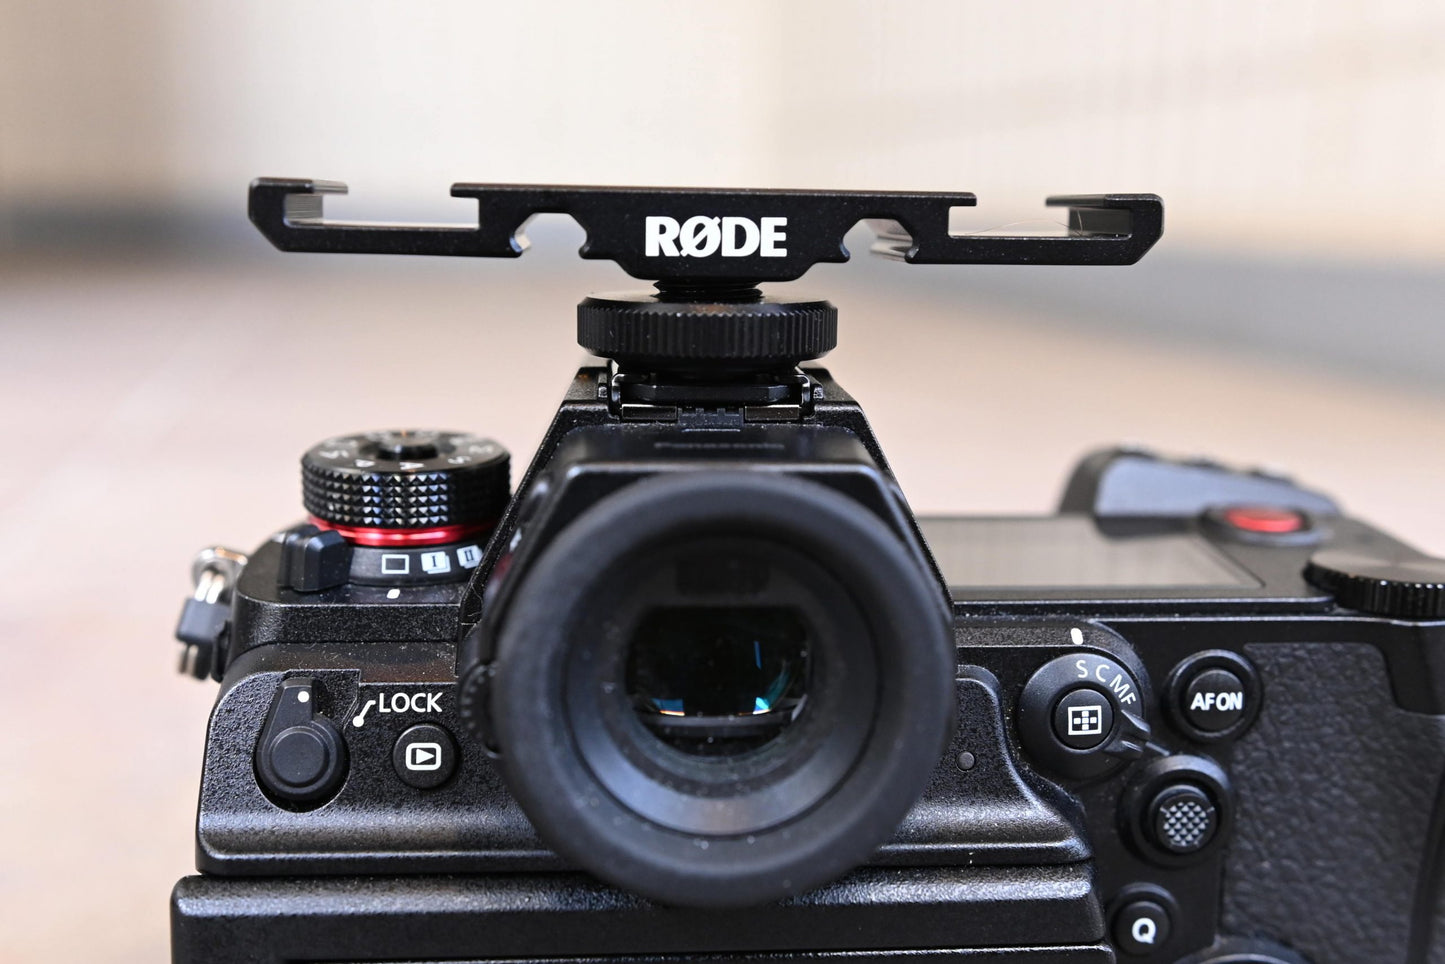 Rode DCS-1 Aluminum Lightweight Dual Cold Shoe Mount for Cameras and Monopods